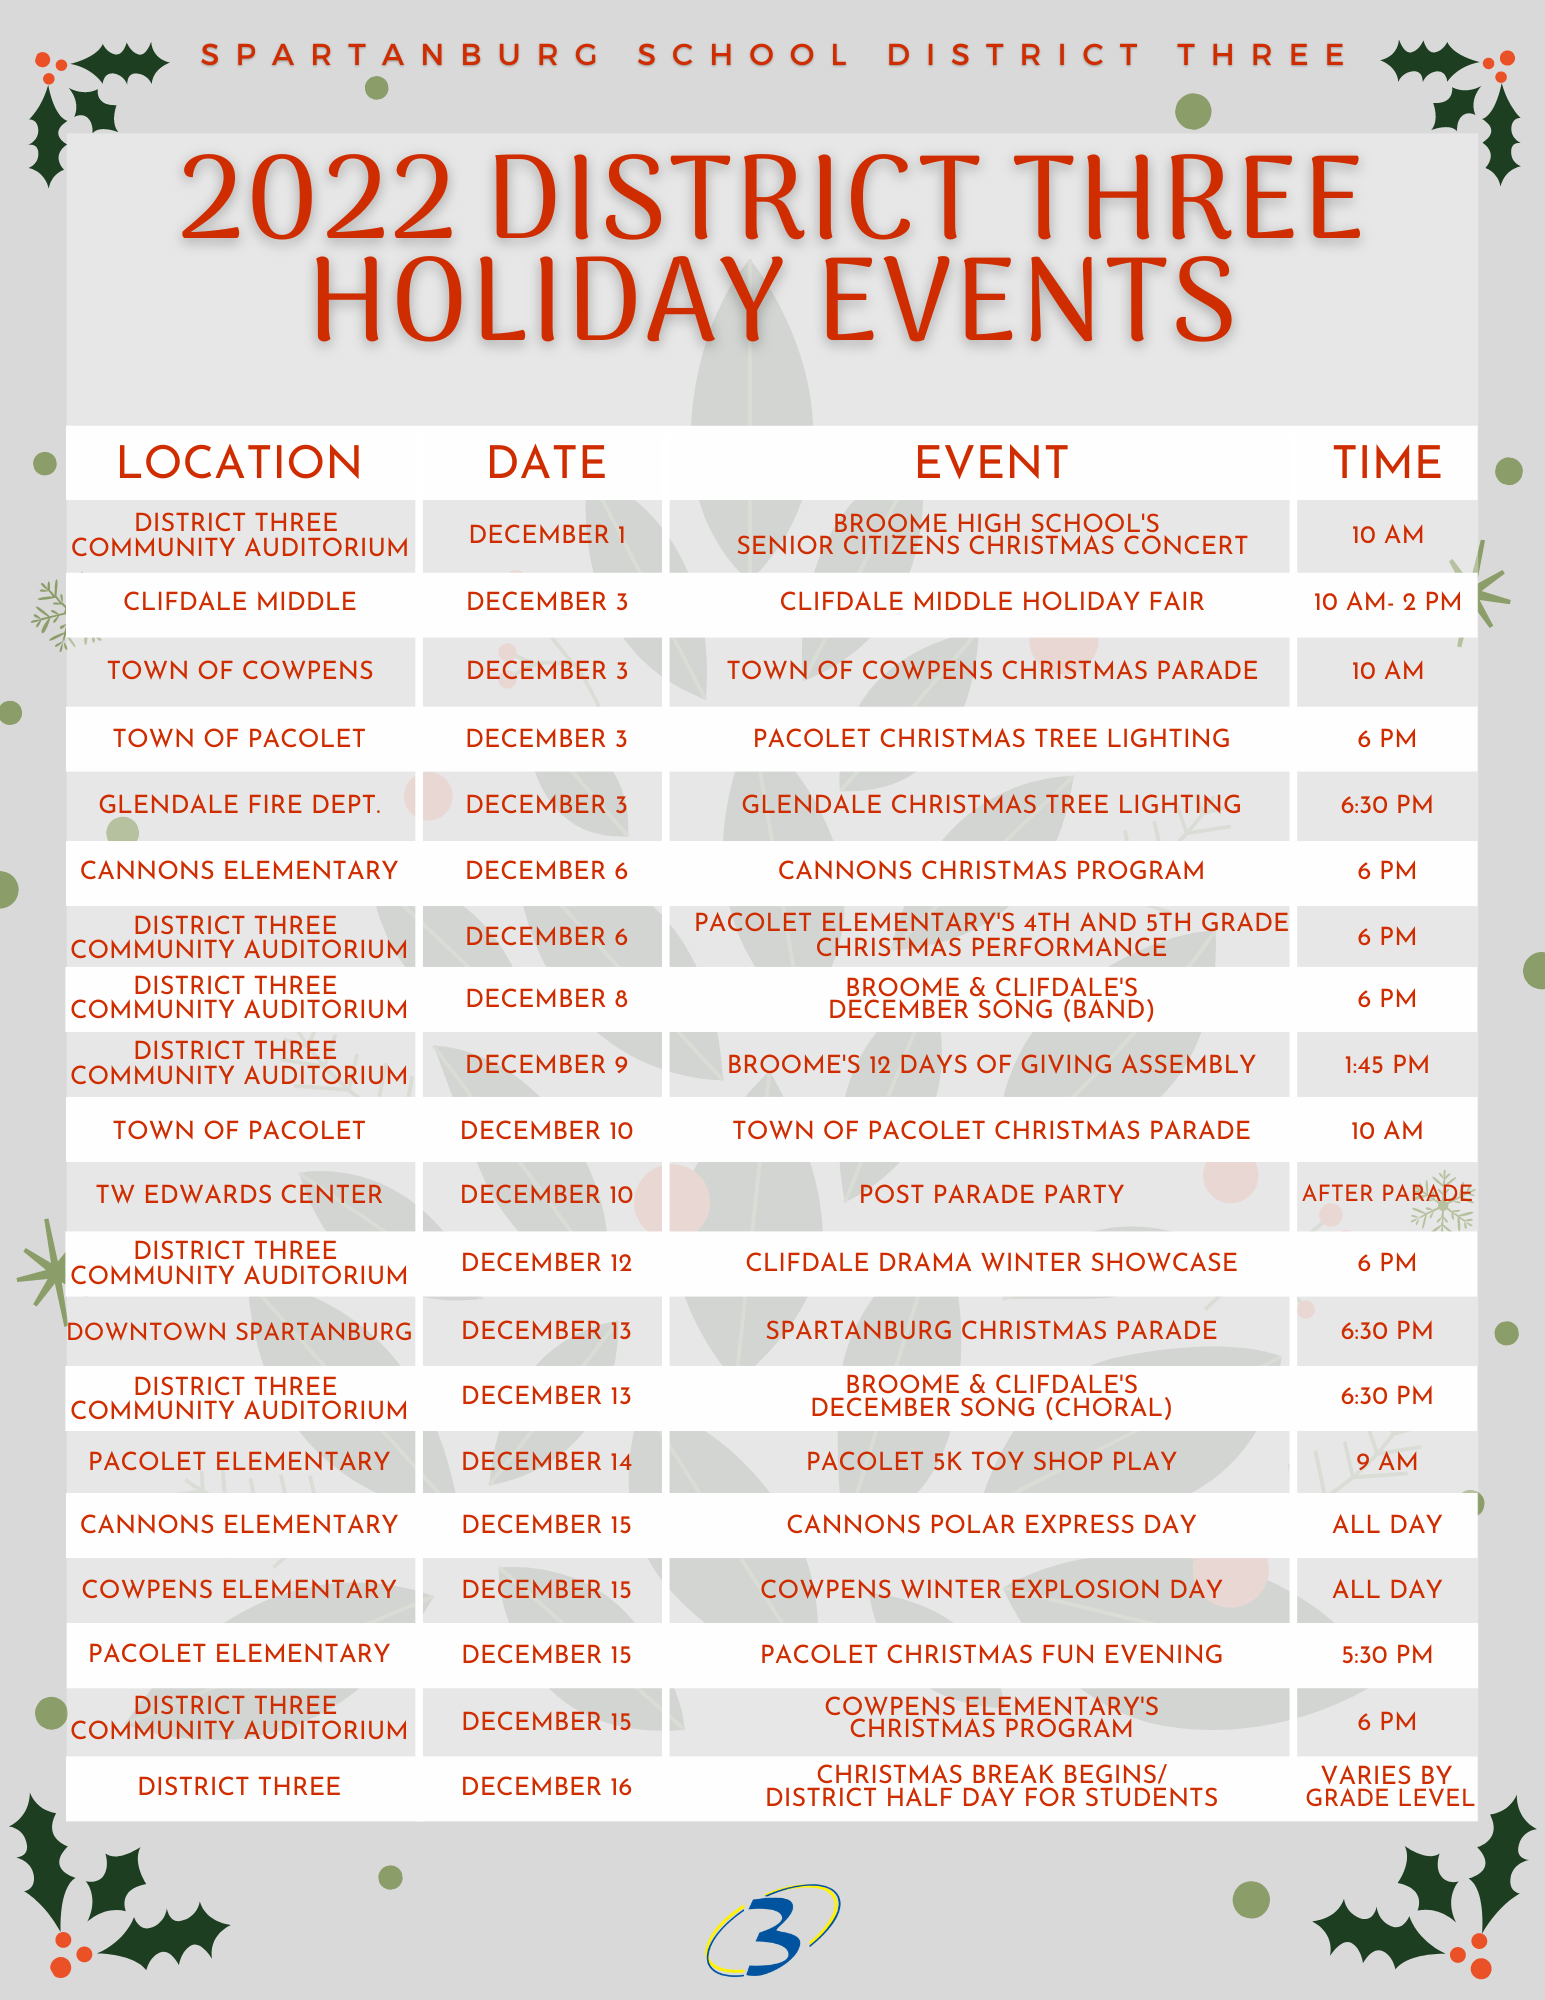 HOLIDAY EVENTS